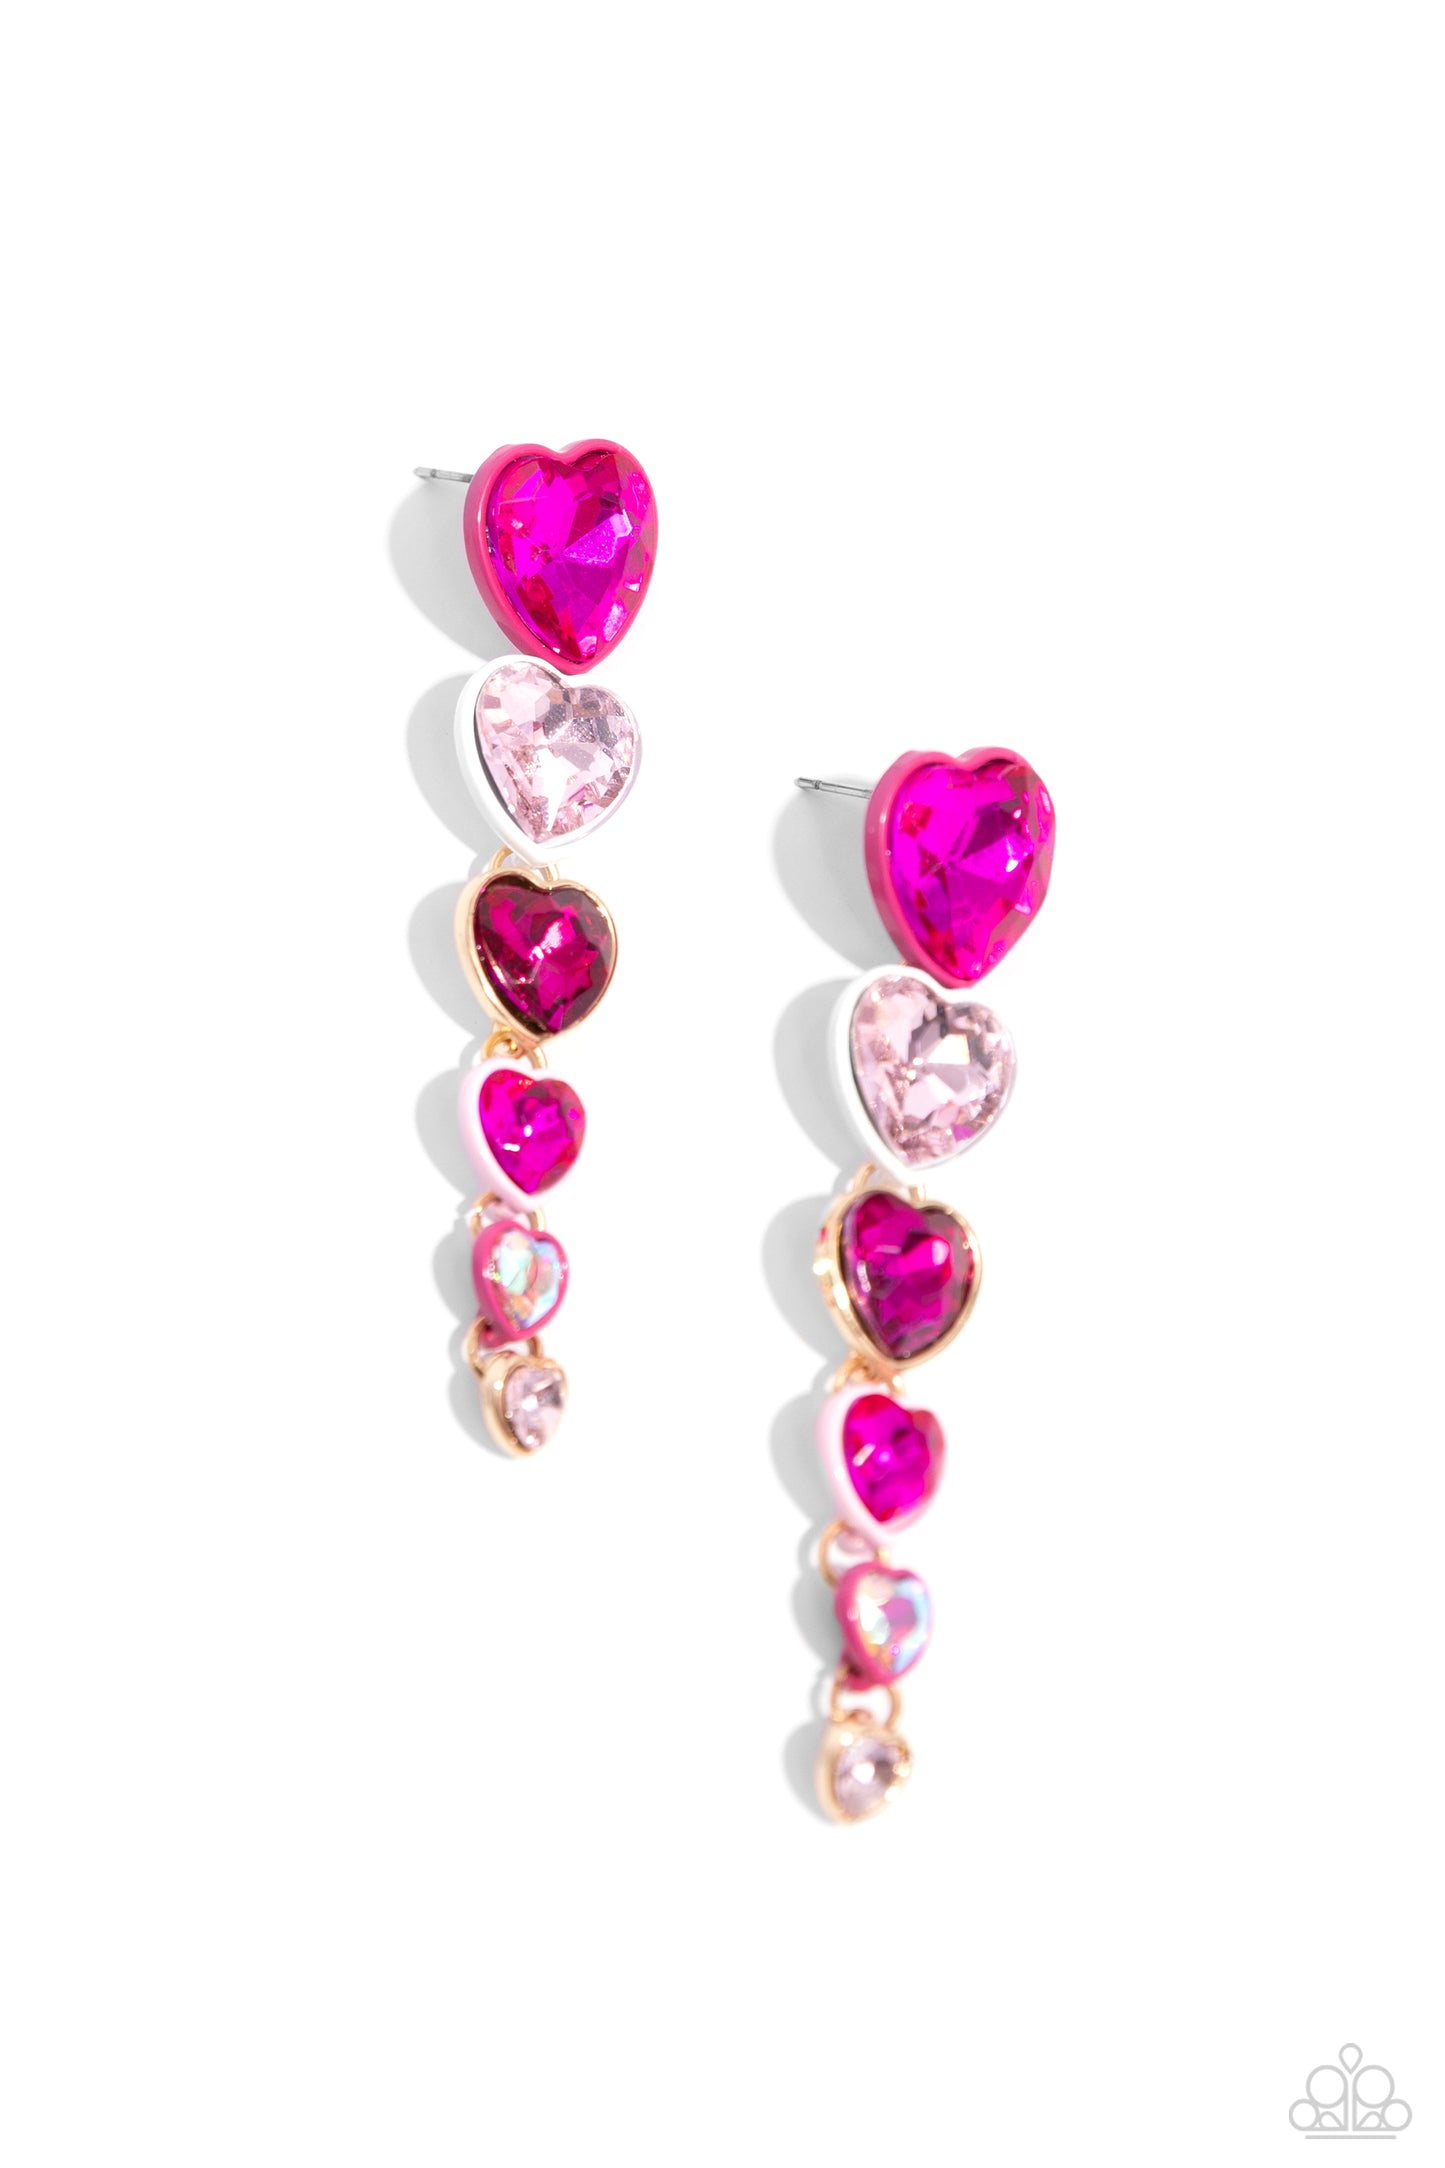 Cascading Casanova Pink Heart Post Earring - Paparazzi Accessories  Featuring sleek Pink Peacock, white, gold, and light pink-painted fittings, faceted fuchsia, white, and iridescent heart gems gradually decrease in size as they trickle from the ear for a glamorously romantic look. Earring attaches to a standard post fitting. Due to its prismatic palette, color may vary.  Sold as one pair of post earrings.  SKU: P5PO-PKXX-101XX